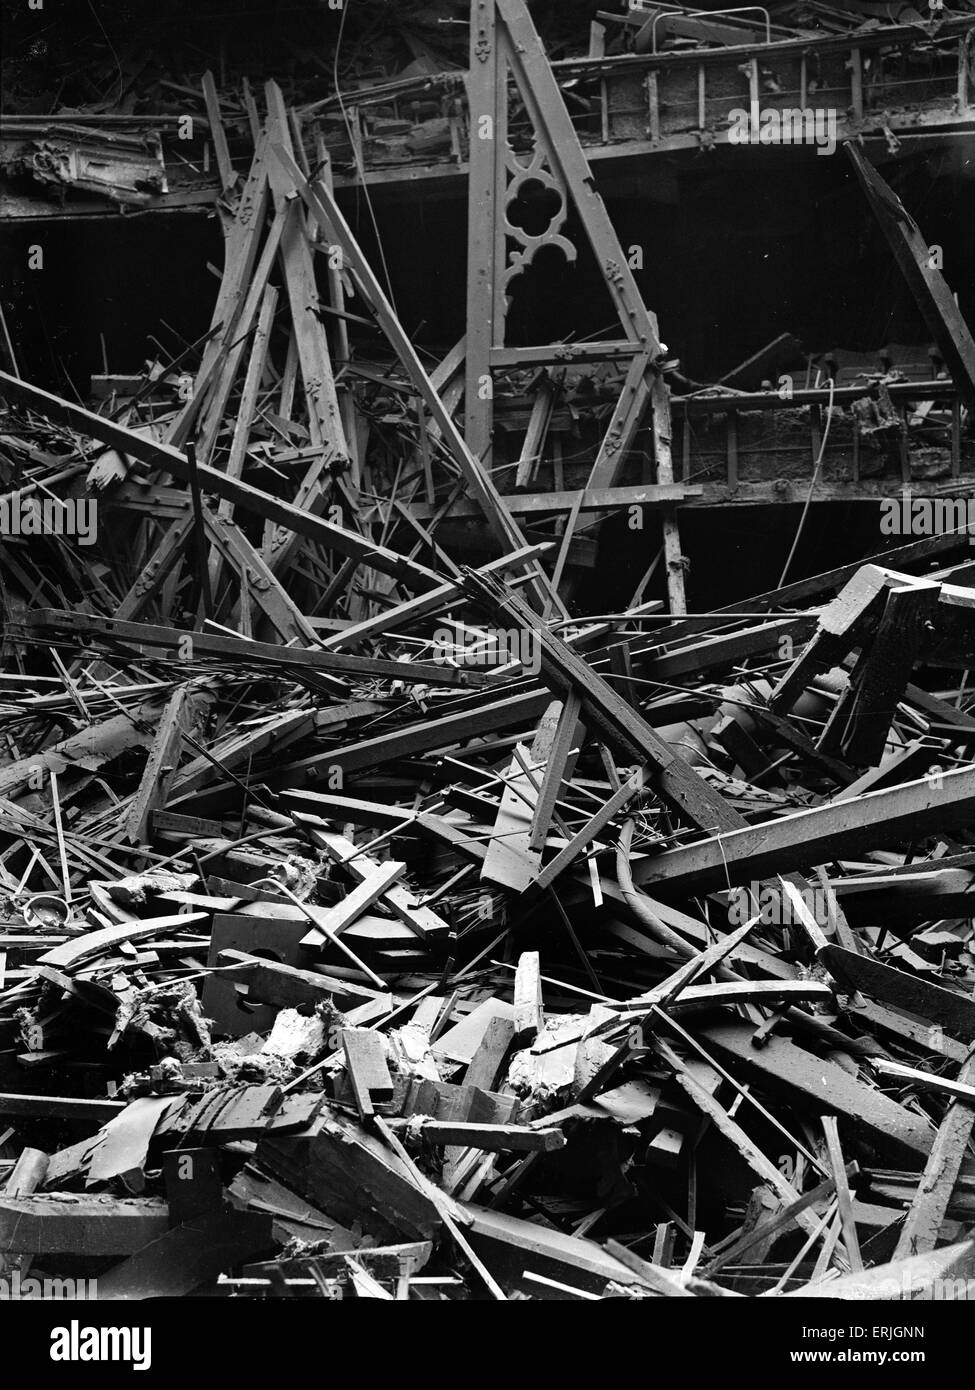 The Prince of Wales Theatre, Broad Street, Birmingham,  was a casualty of one of the first air raids over Birmingham when it took a direct hit on the 9th of April 1941, completely destroying the auditorium and interior. Pictured 10th April 1941. Stock Photo